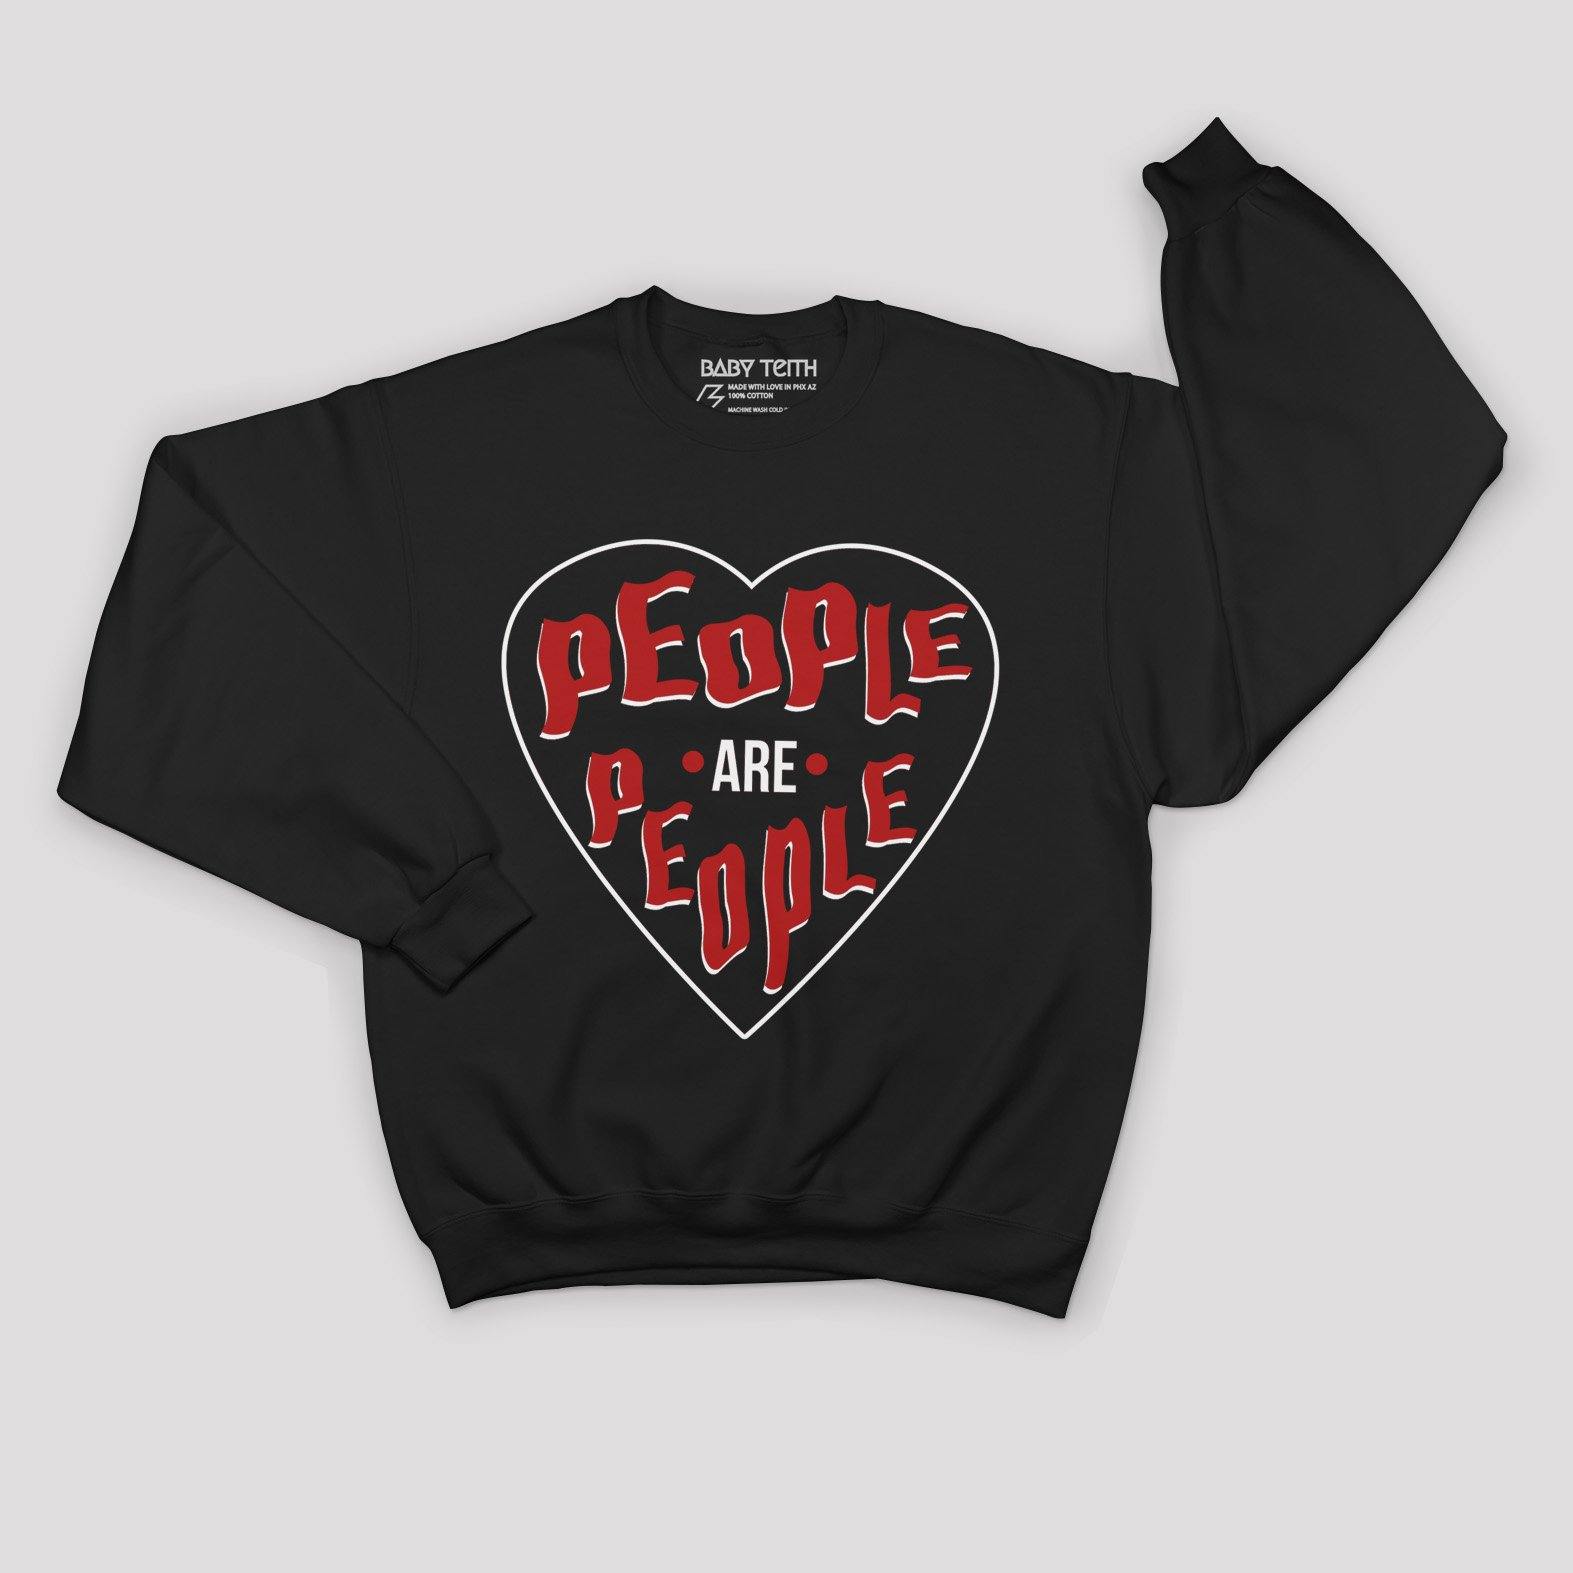 &quot;People are People&quot; Sweatshirt for Kids - Baby Teith